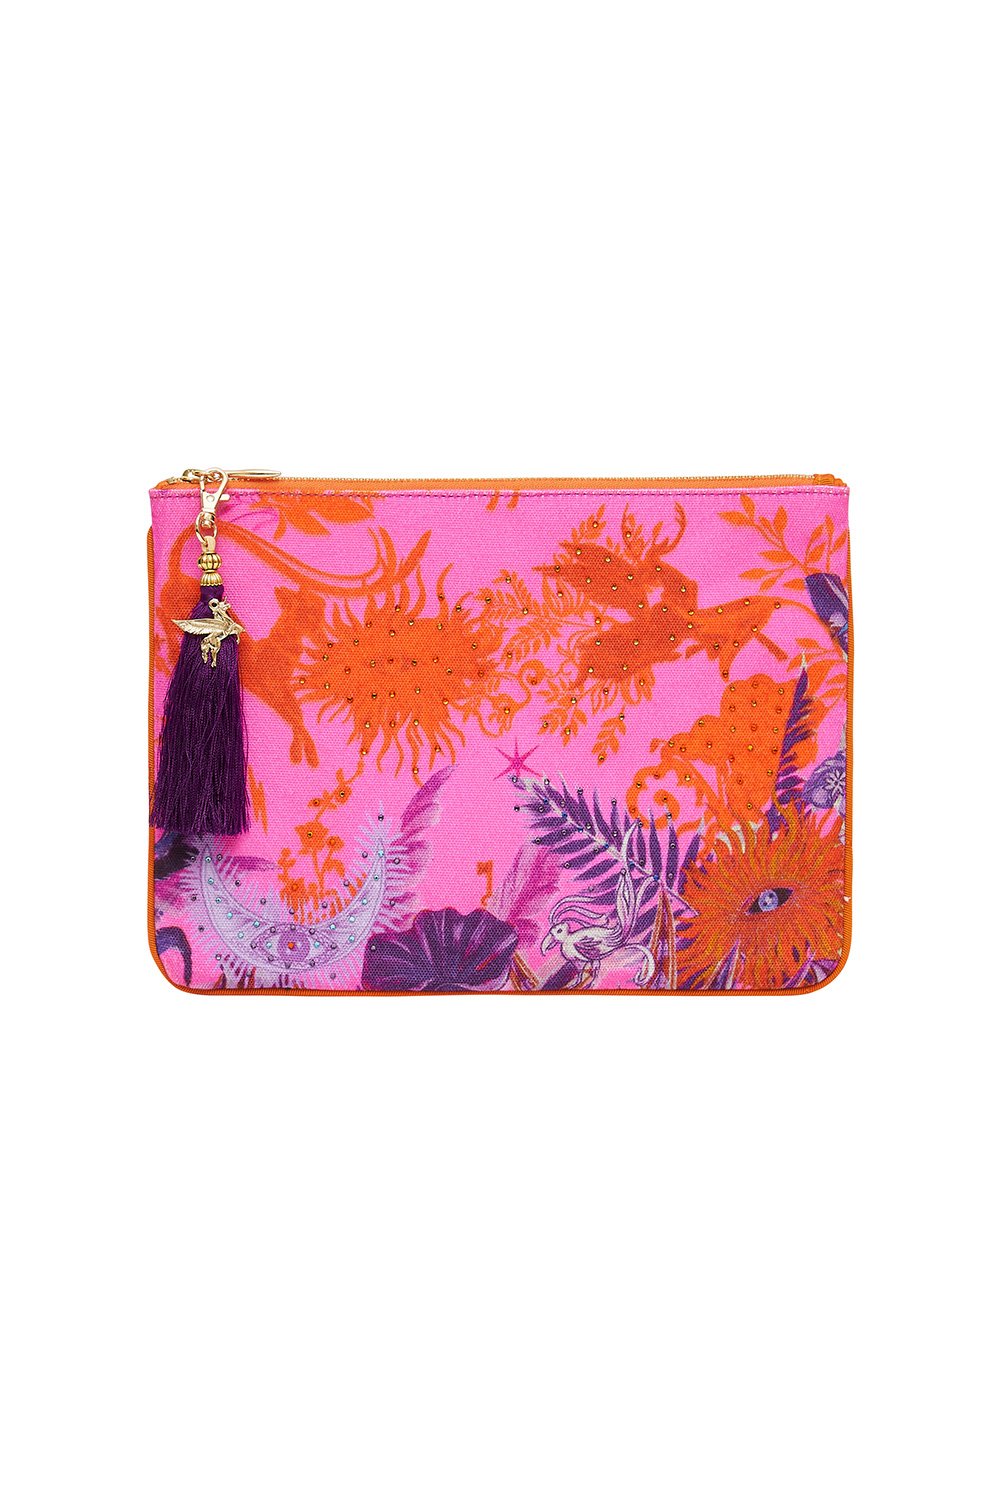 SMALL CANVAS CLUTCH TROPIC OF NEON